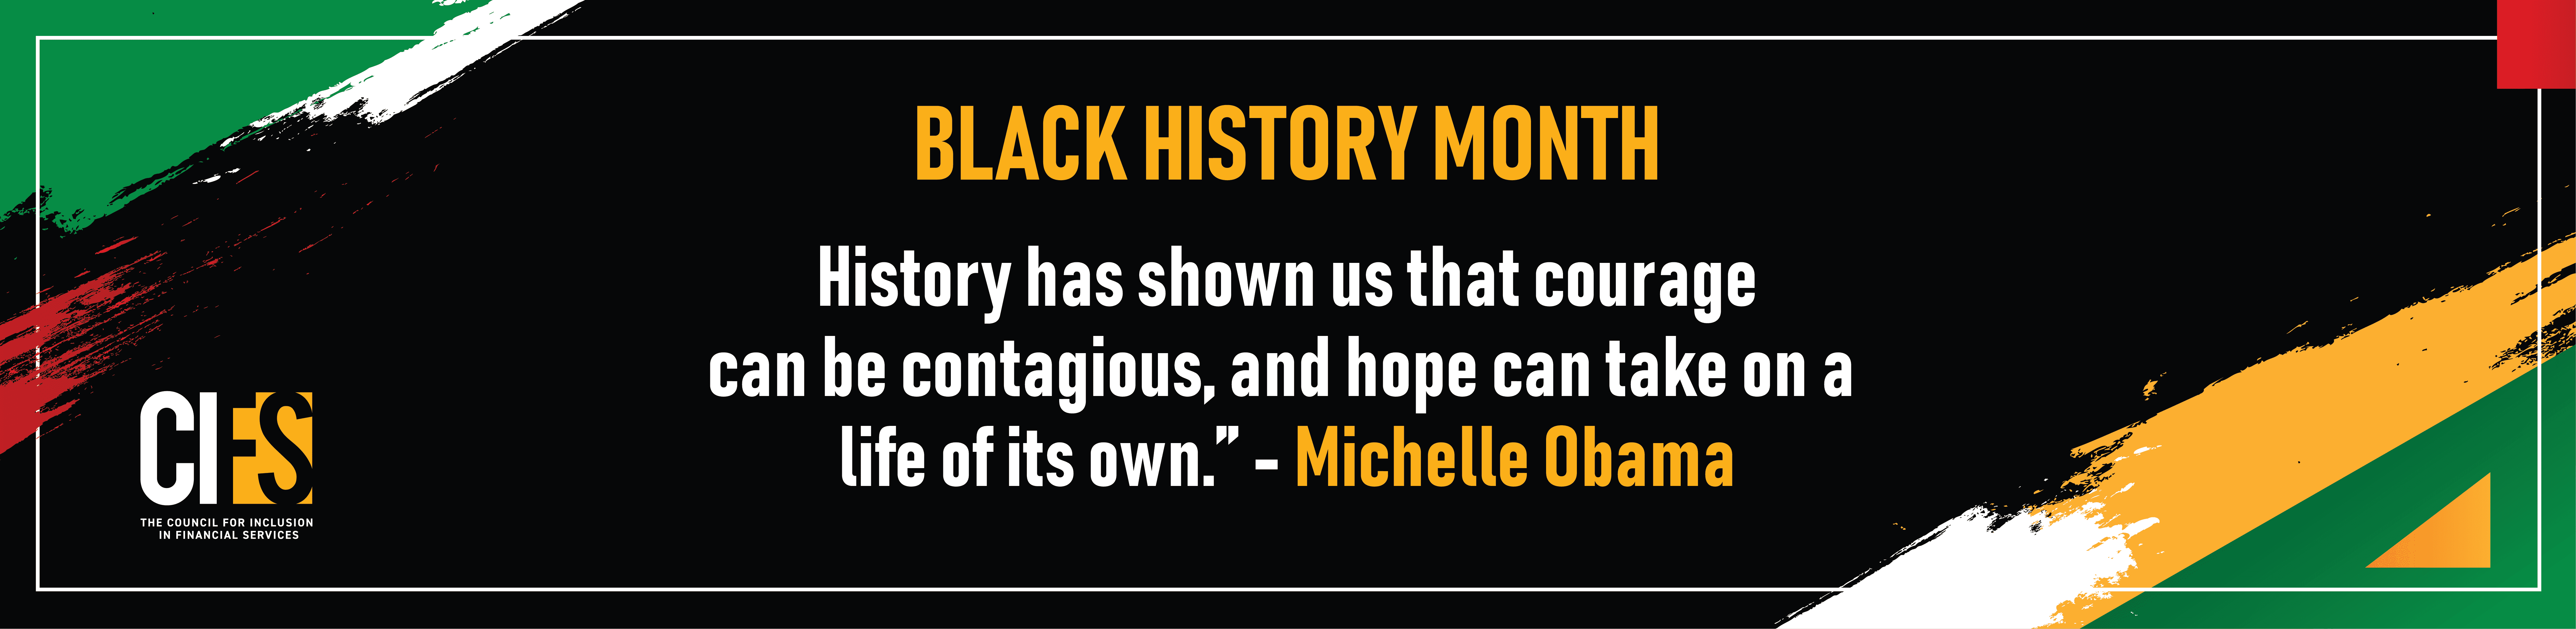 black history month quote from Michelle Obama